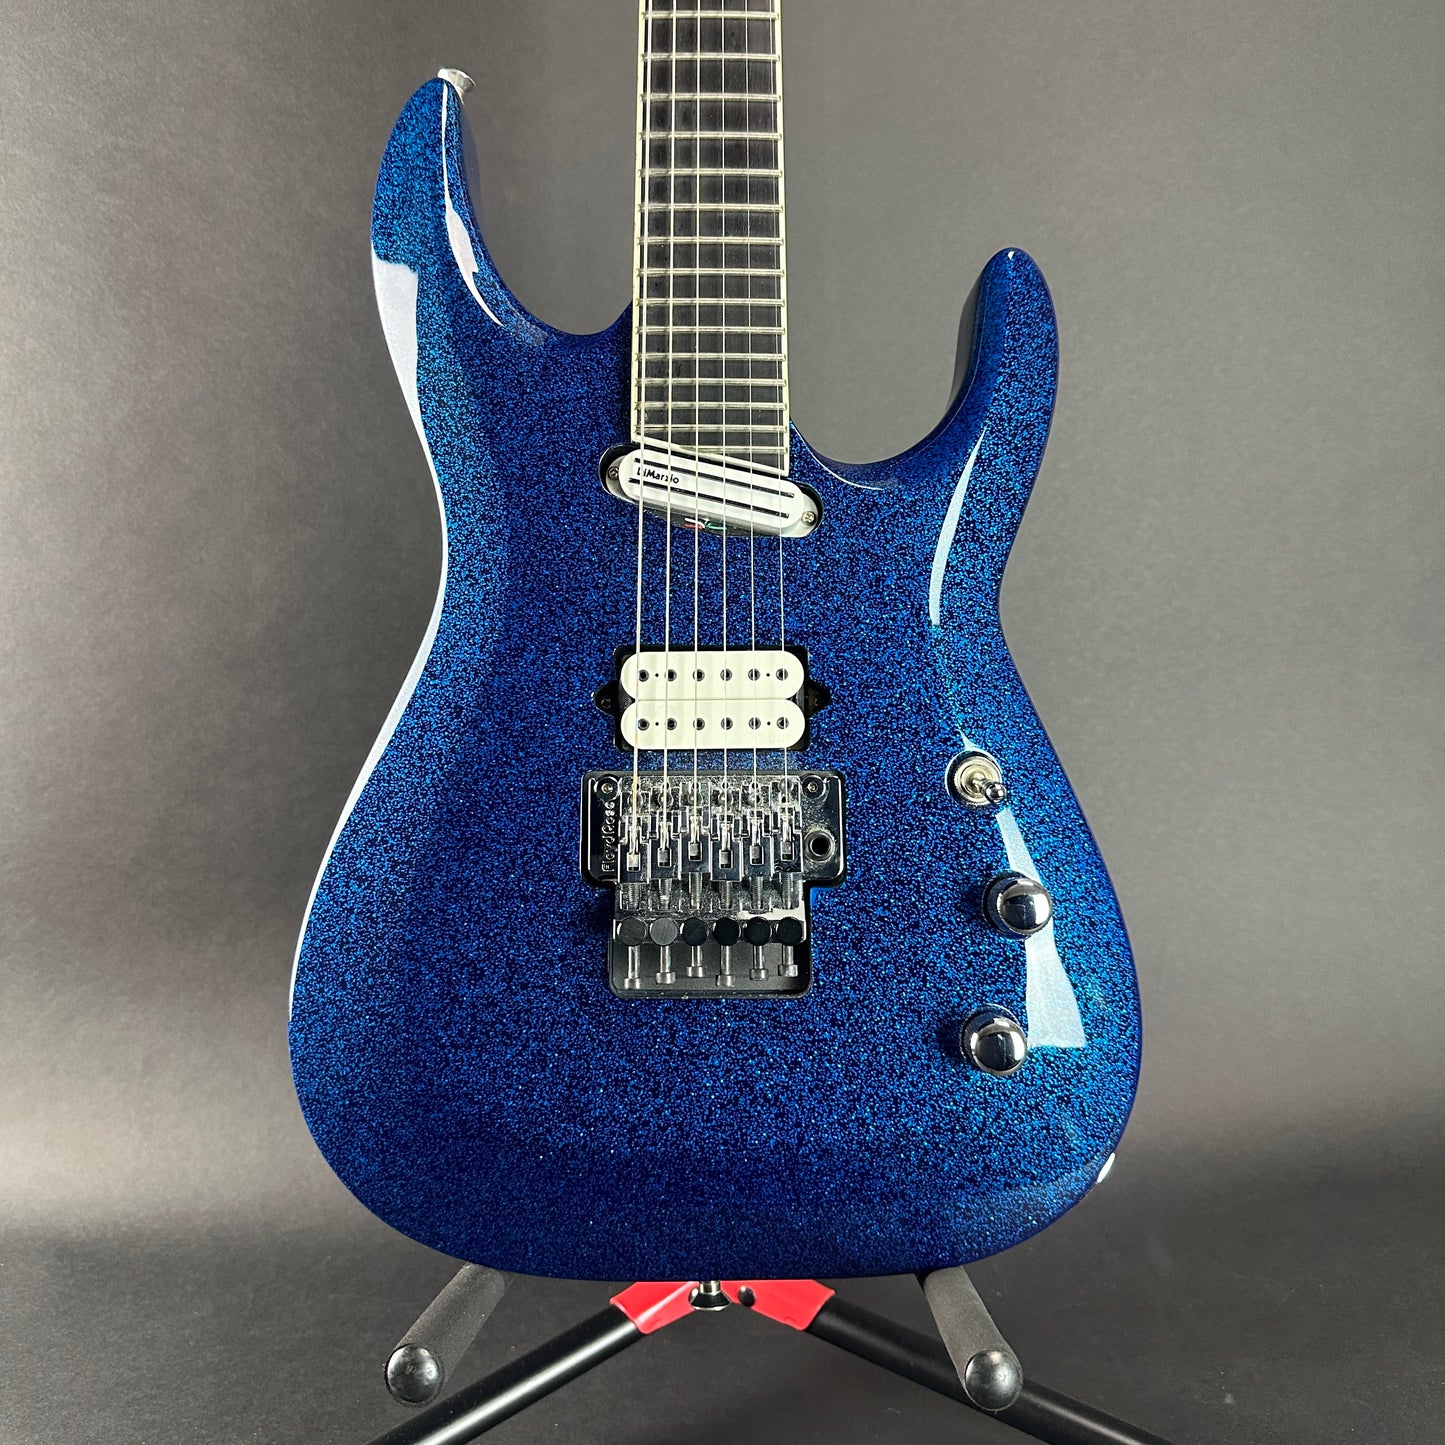 Front of Used Jackson LTD Wildwood Series Soloist Arch Top Extreme SL27 EX Blue Sparkle.